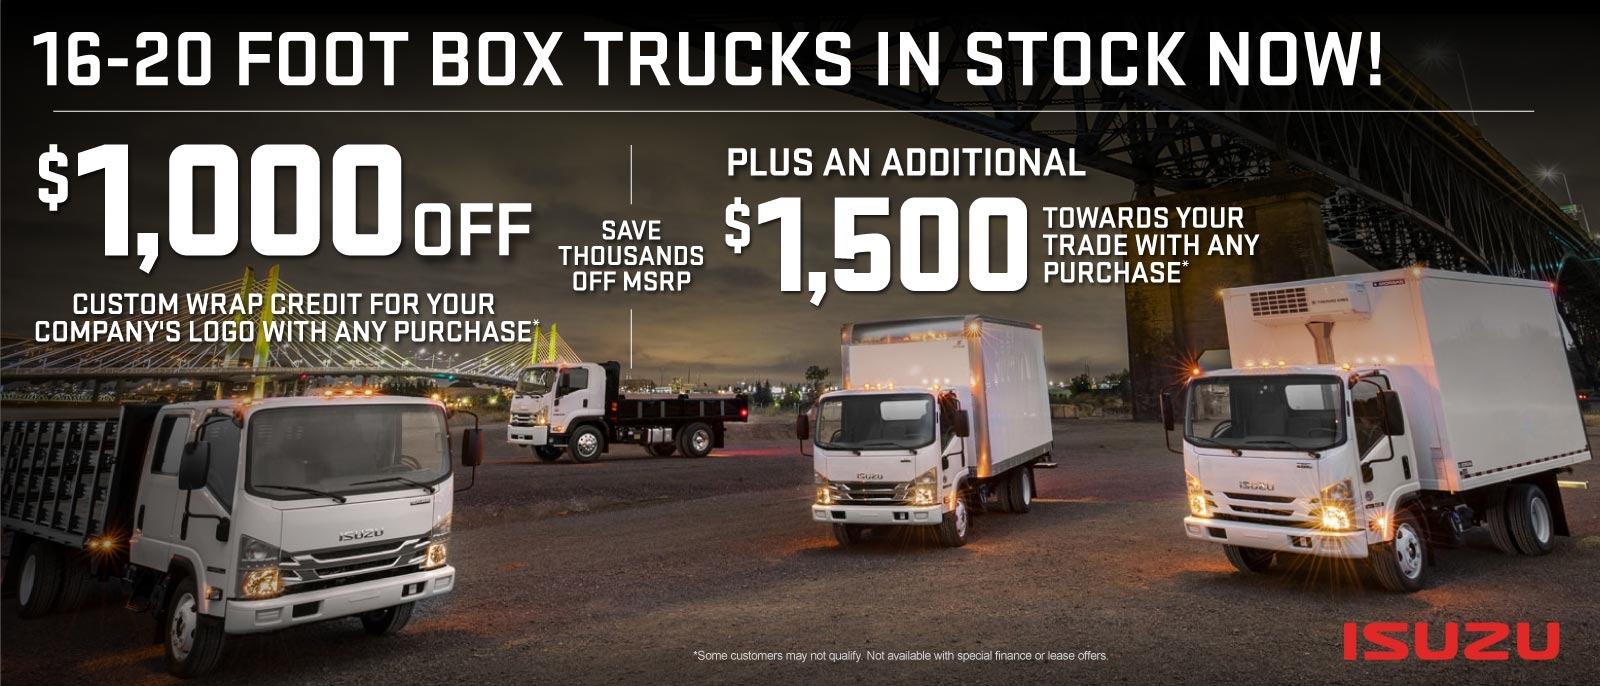 16-20 Foot Box Trucks In Stock Now! | $1,000 Off Custom Wrap Credit For Your Company's Logo With Any Purchase* | Save Thousands Off MSRP Plus An Additional $1,500 Towards Your Trade With Any Purchase*